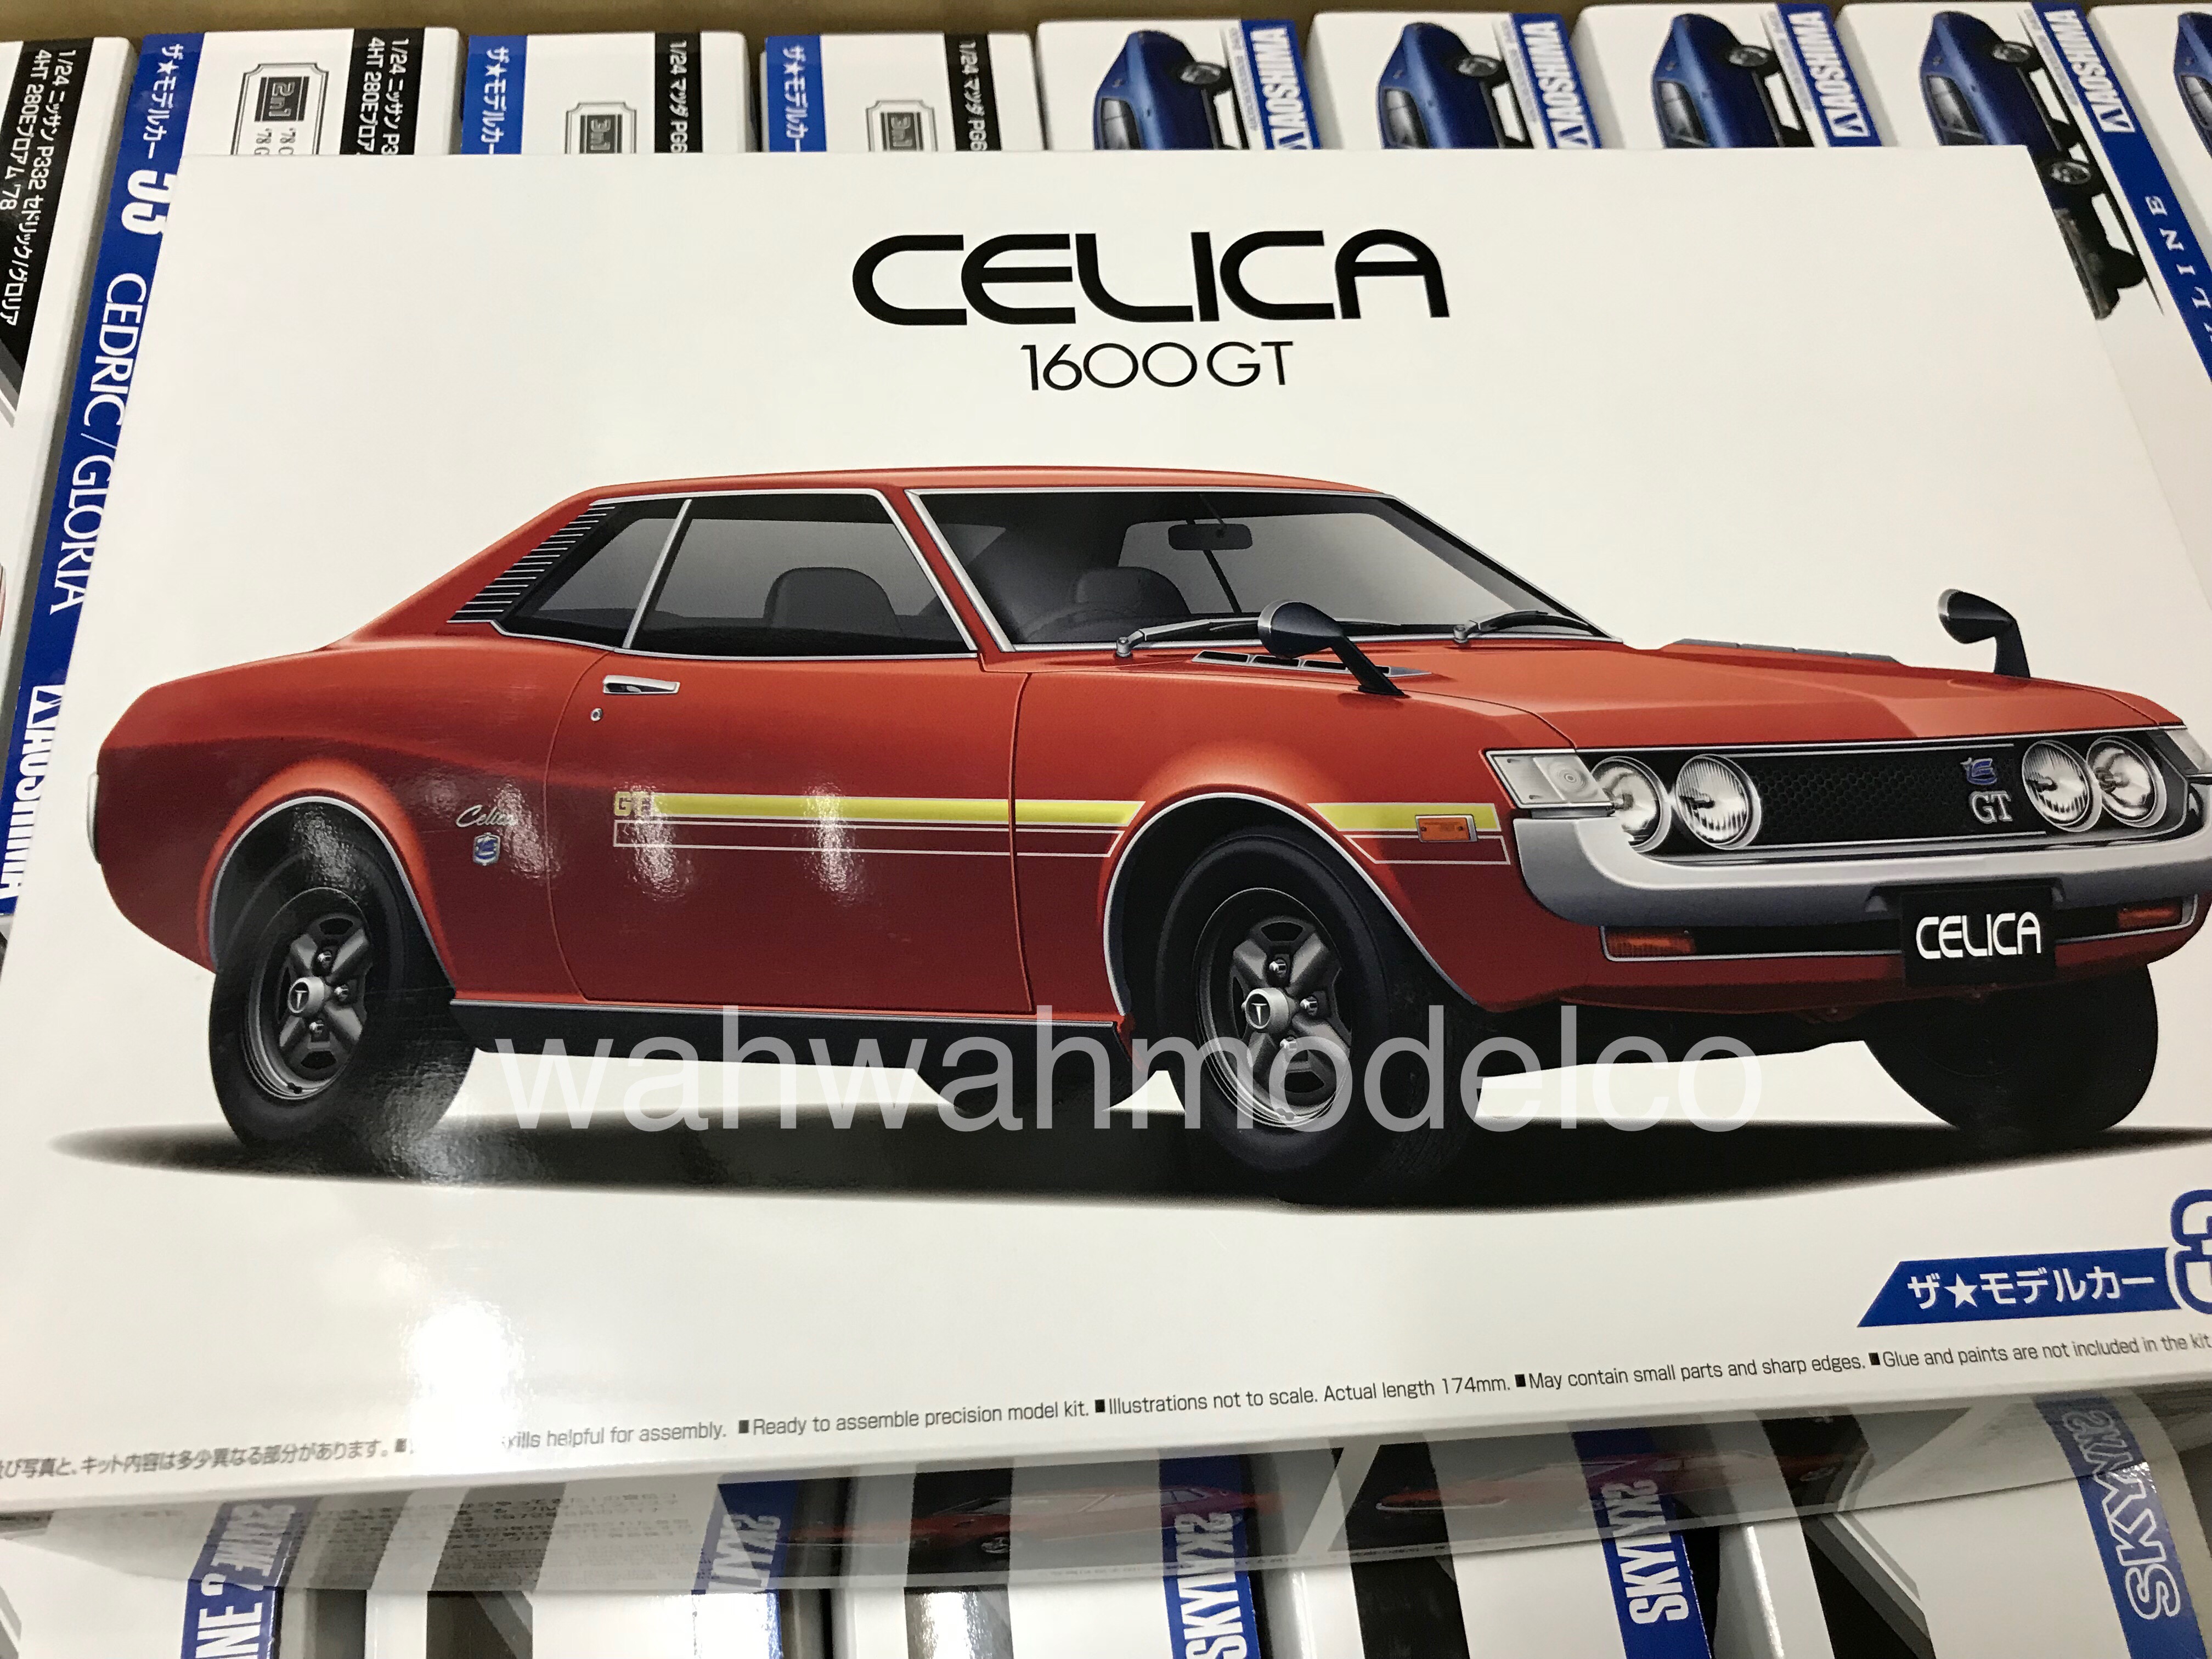 AOSHIMA 1/24 Scale Kit 58459 The Model Car 037 Toyota Ra35 Celica LB 2000gt for sale online 